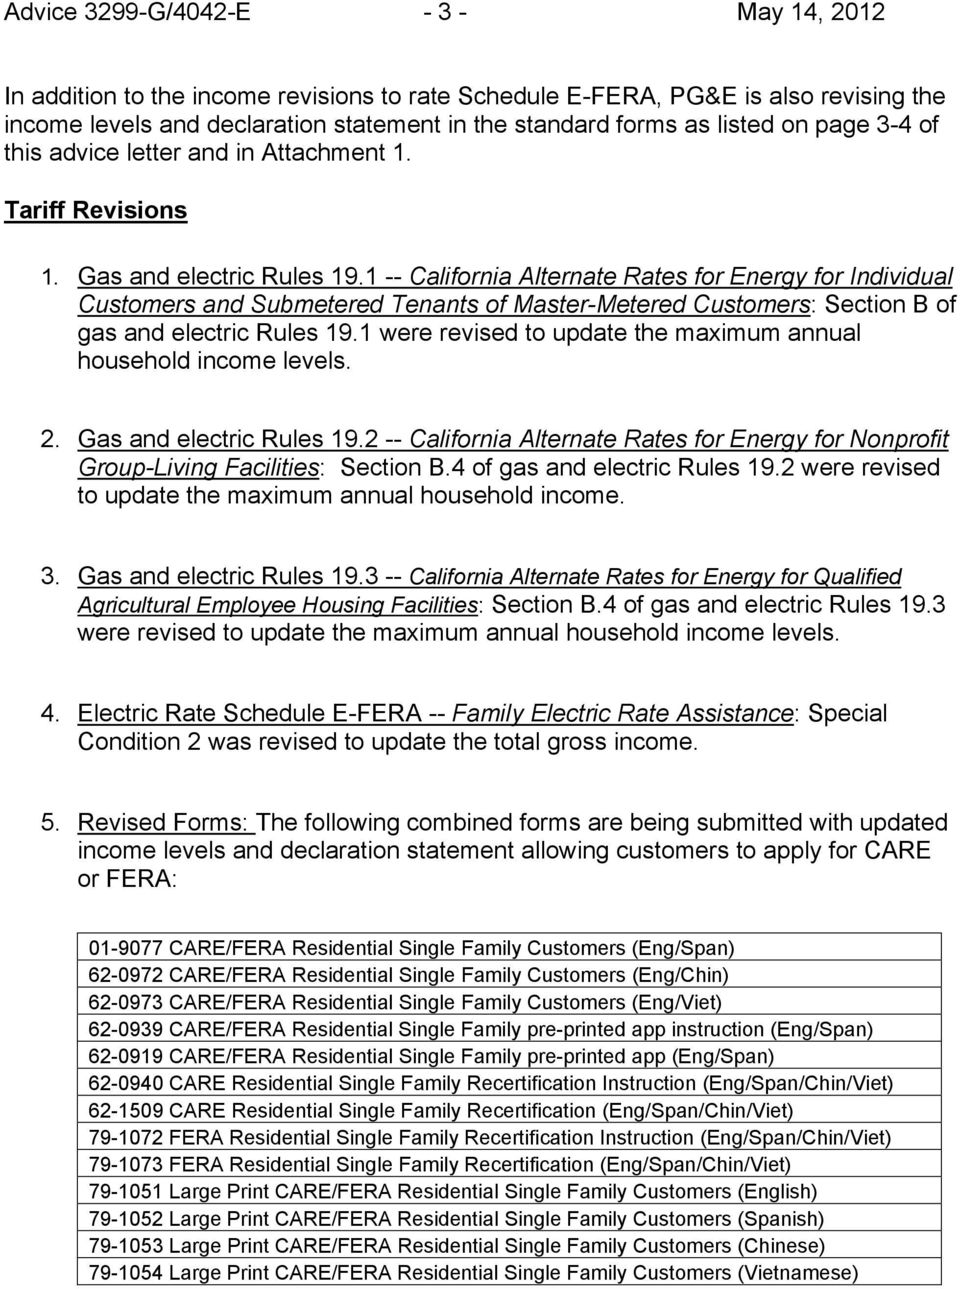 1 -- California Alternate Rates for Energy for Individual Customers and Submetered Tenants of Master-Metered Customers: Section B of gas and electric Rules 19.